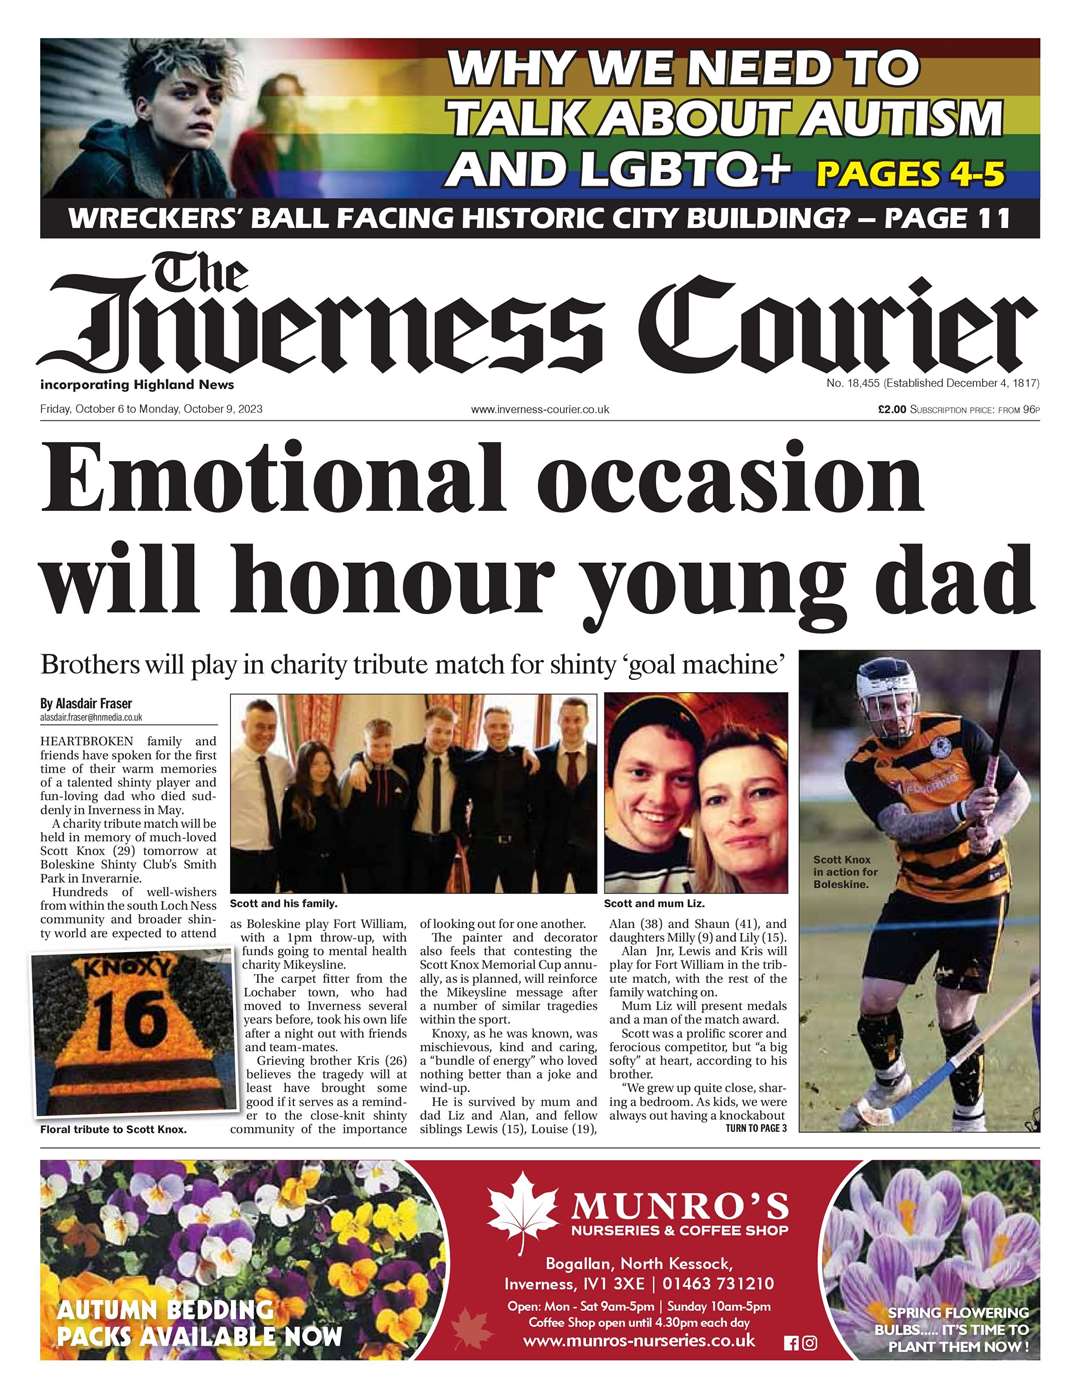 The Inverness Courier, October 6, front page.